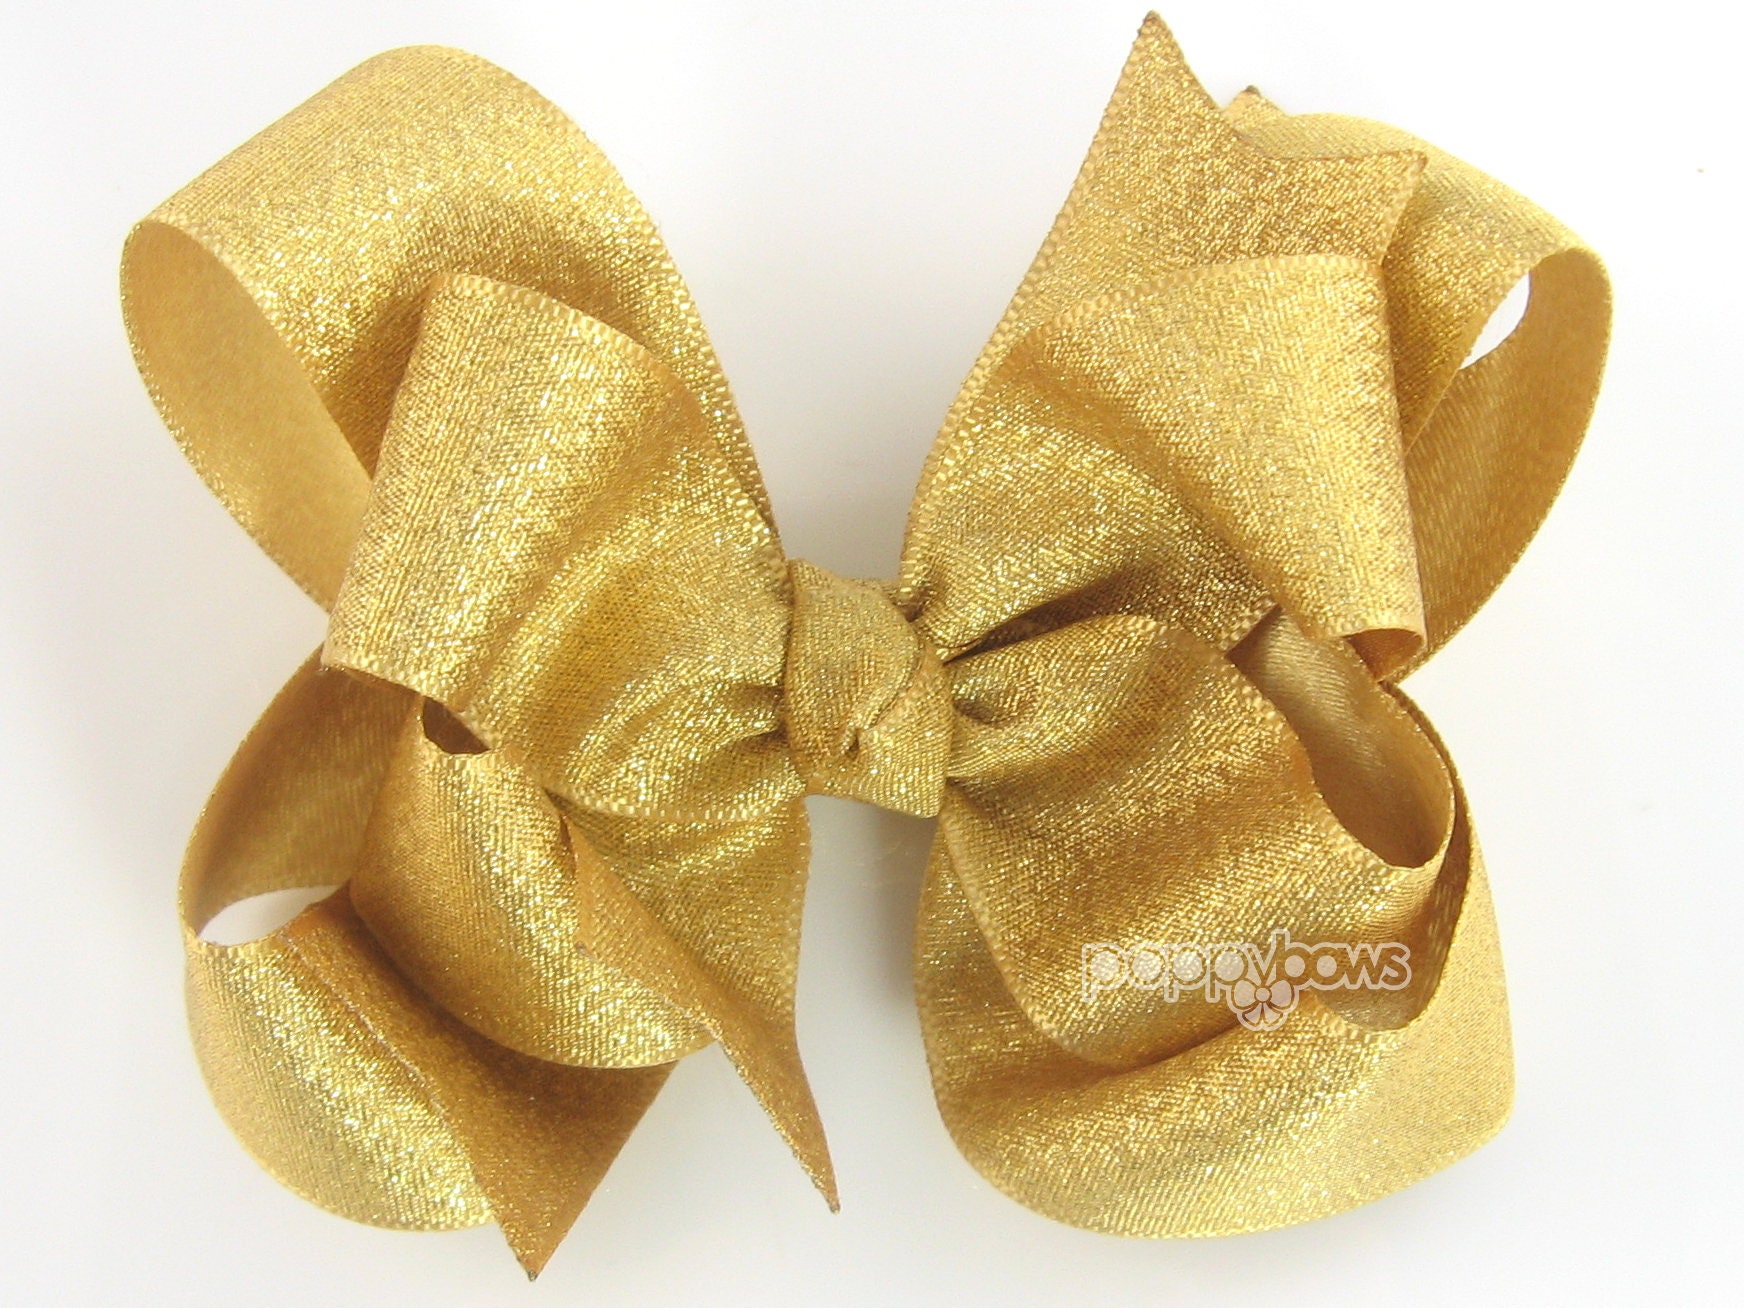 5. Navy Blue and Gold Hair Bow Headband - wide 6